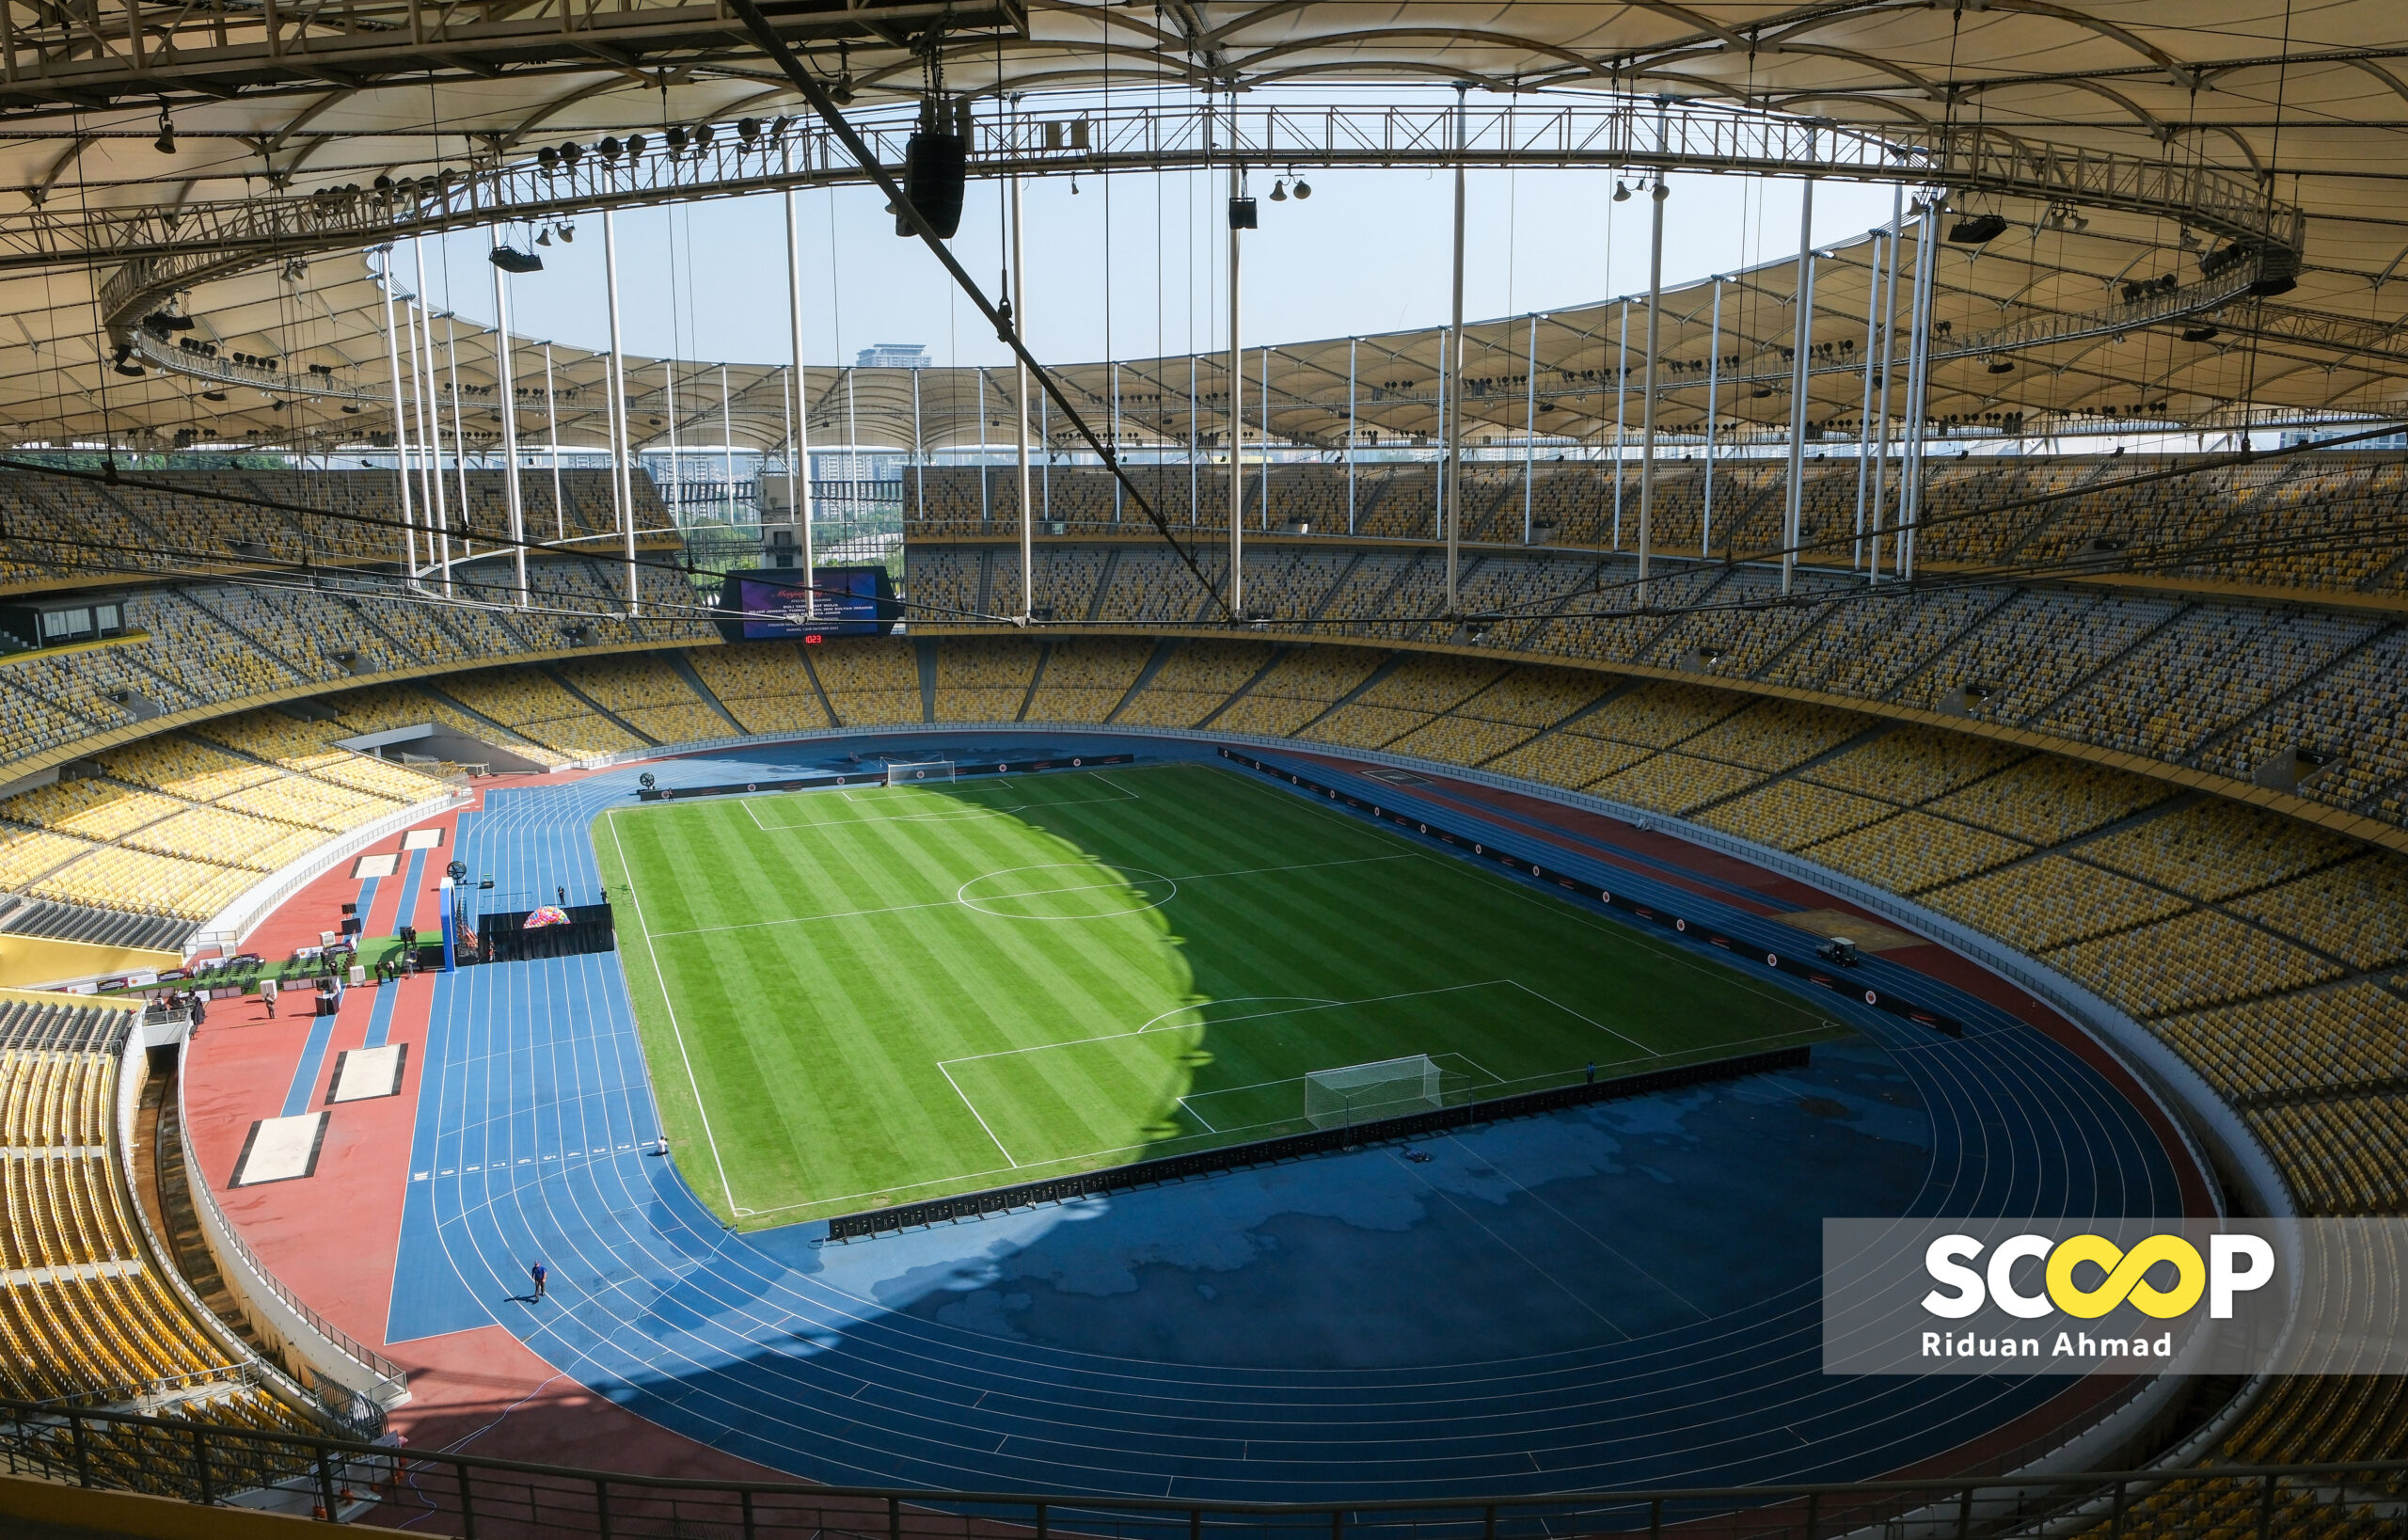 Hybrid grass at Bukit Jalil: feasible or far-fetched?